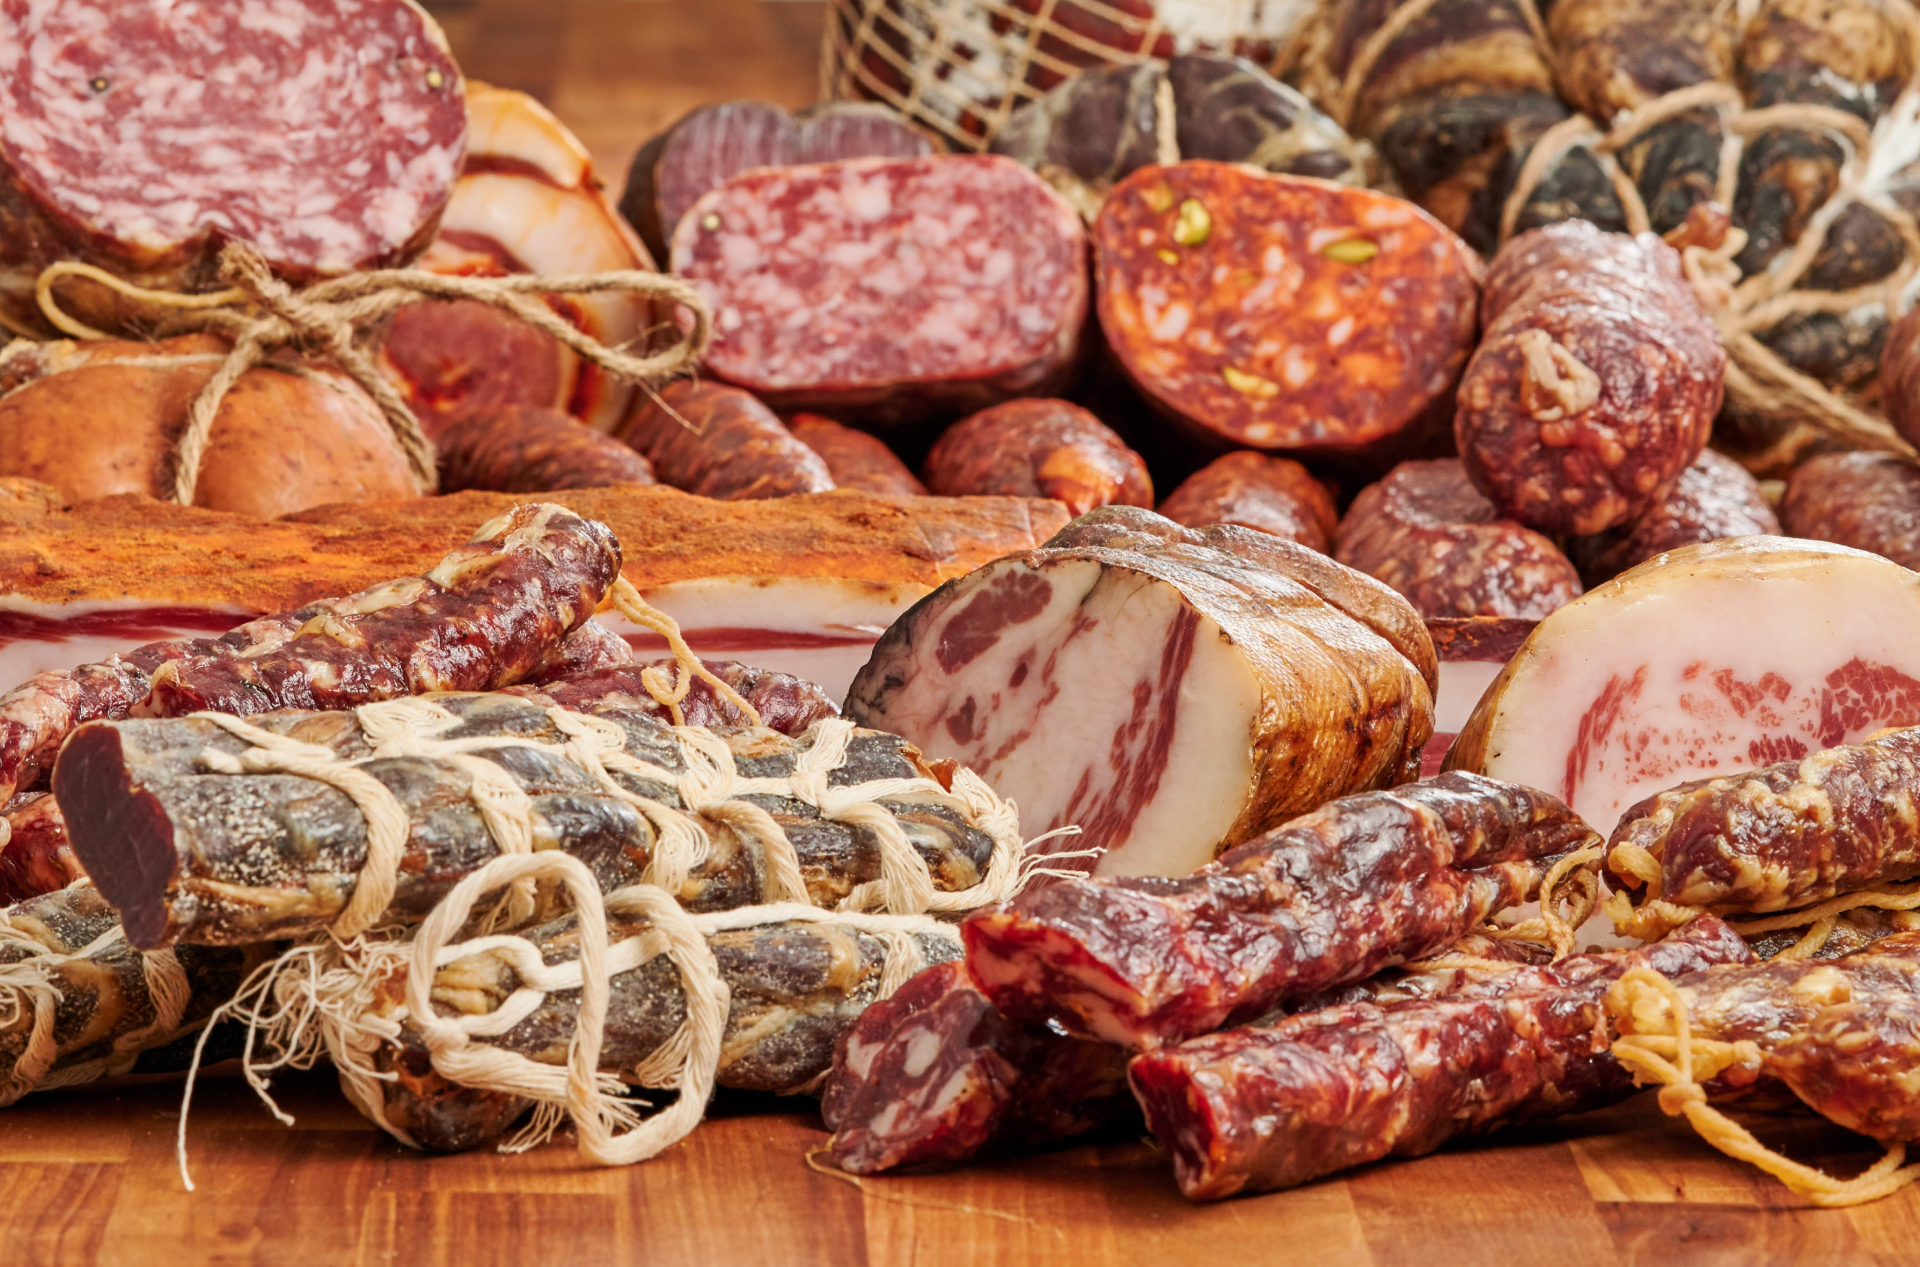 Several kinds of salami spread out on a table